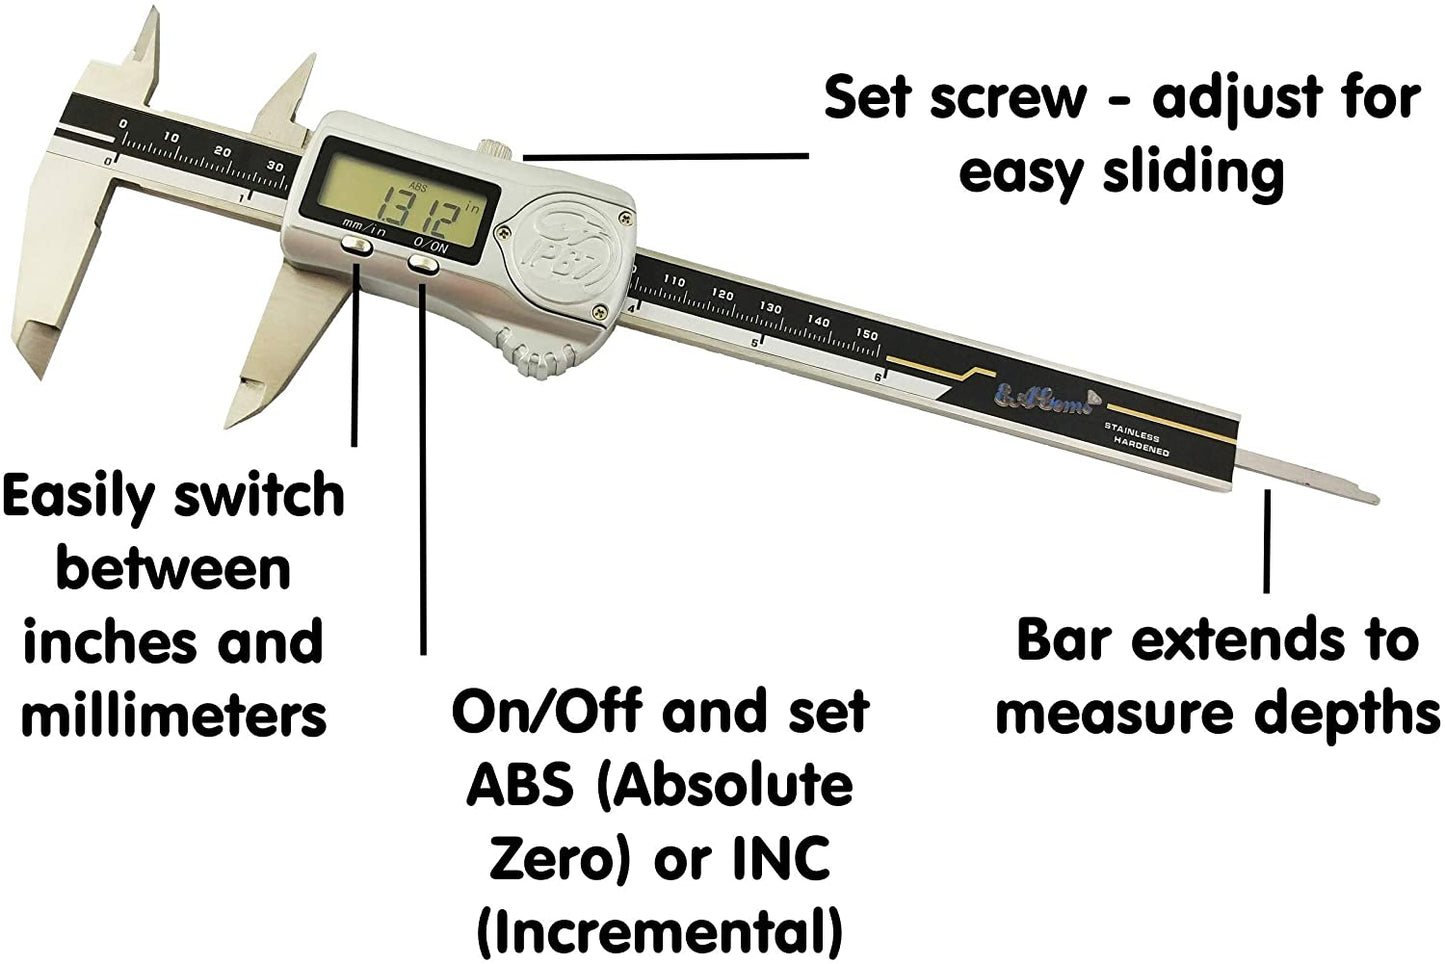 Digital Caliper, Absolute Origin Stainless Steel Electronic Measuring Tool by EAGems, IP67 Waterproof Rating - 6 inch/150mm - Large LCD Screen Displays SAE/Metric; Accurate, Precise Vernier Calipers - (For 4 piece(s))